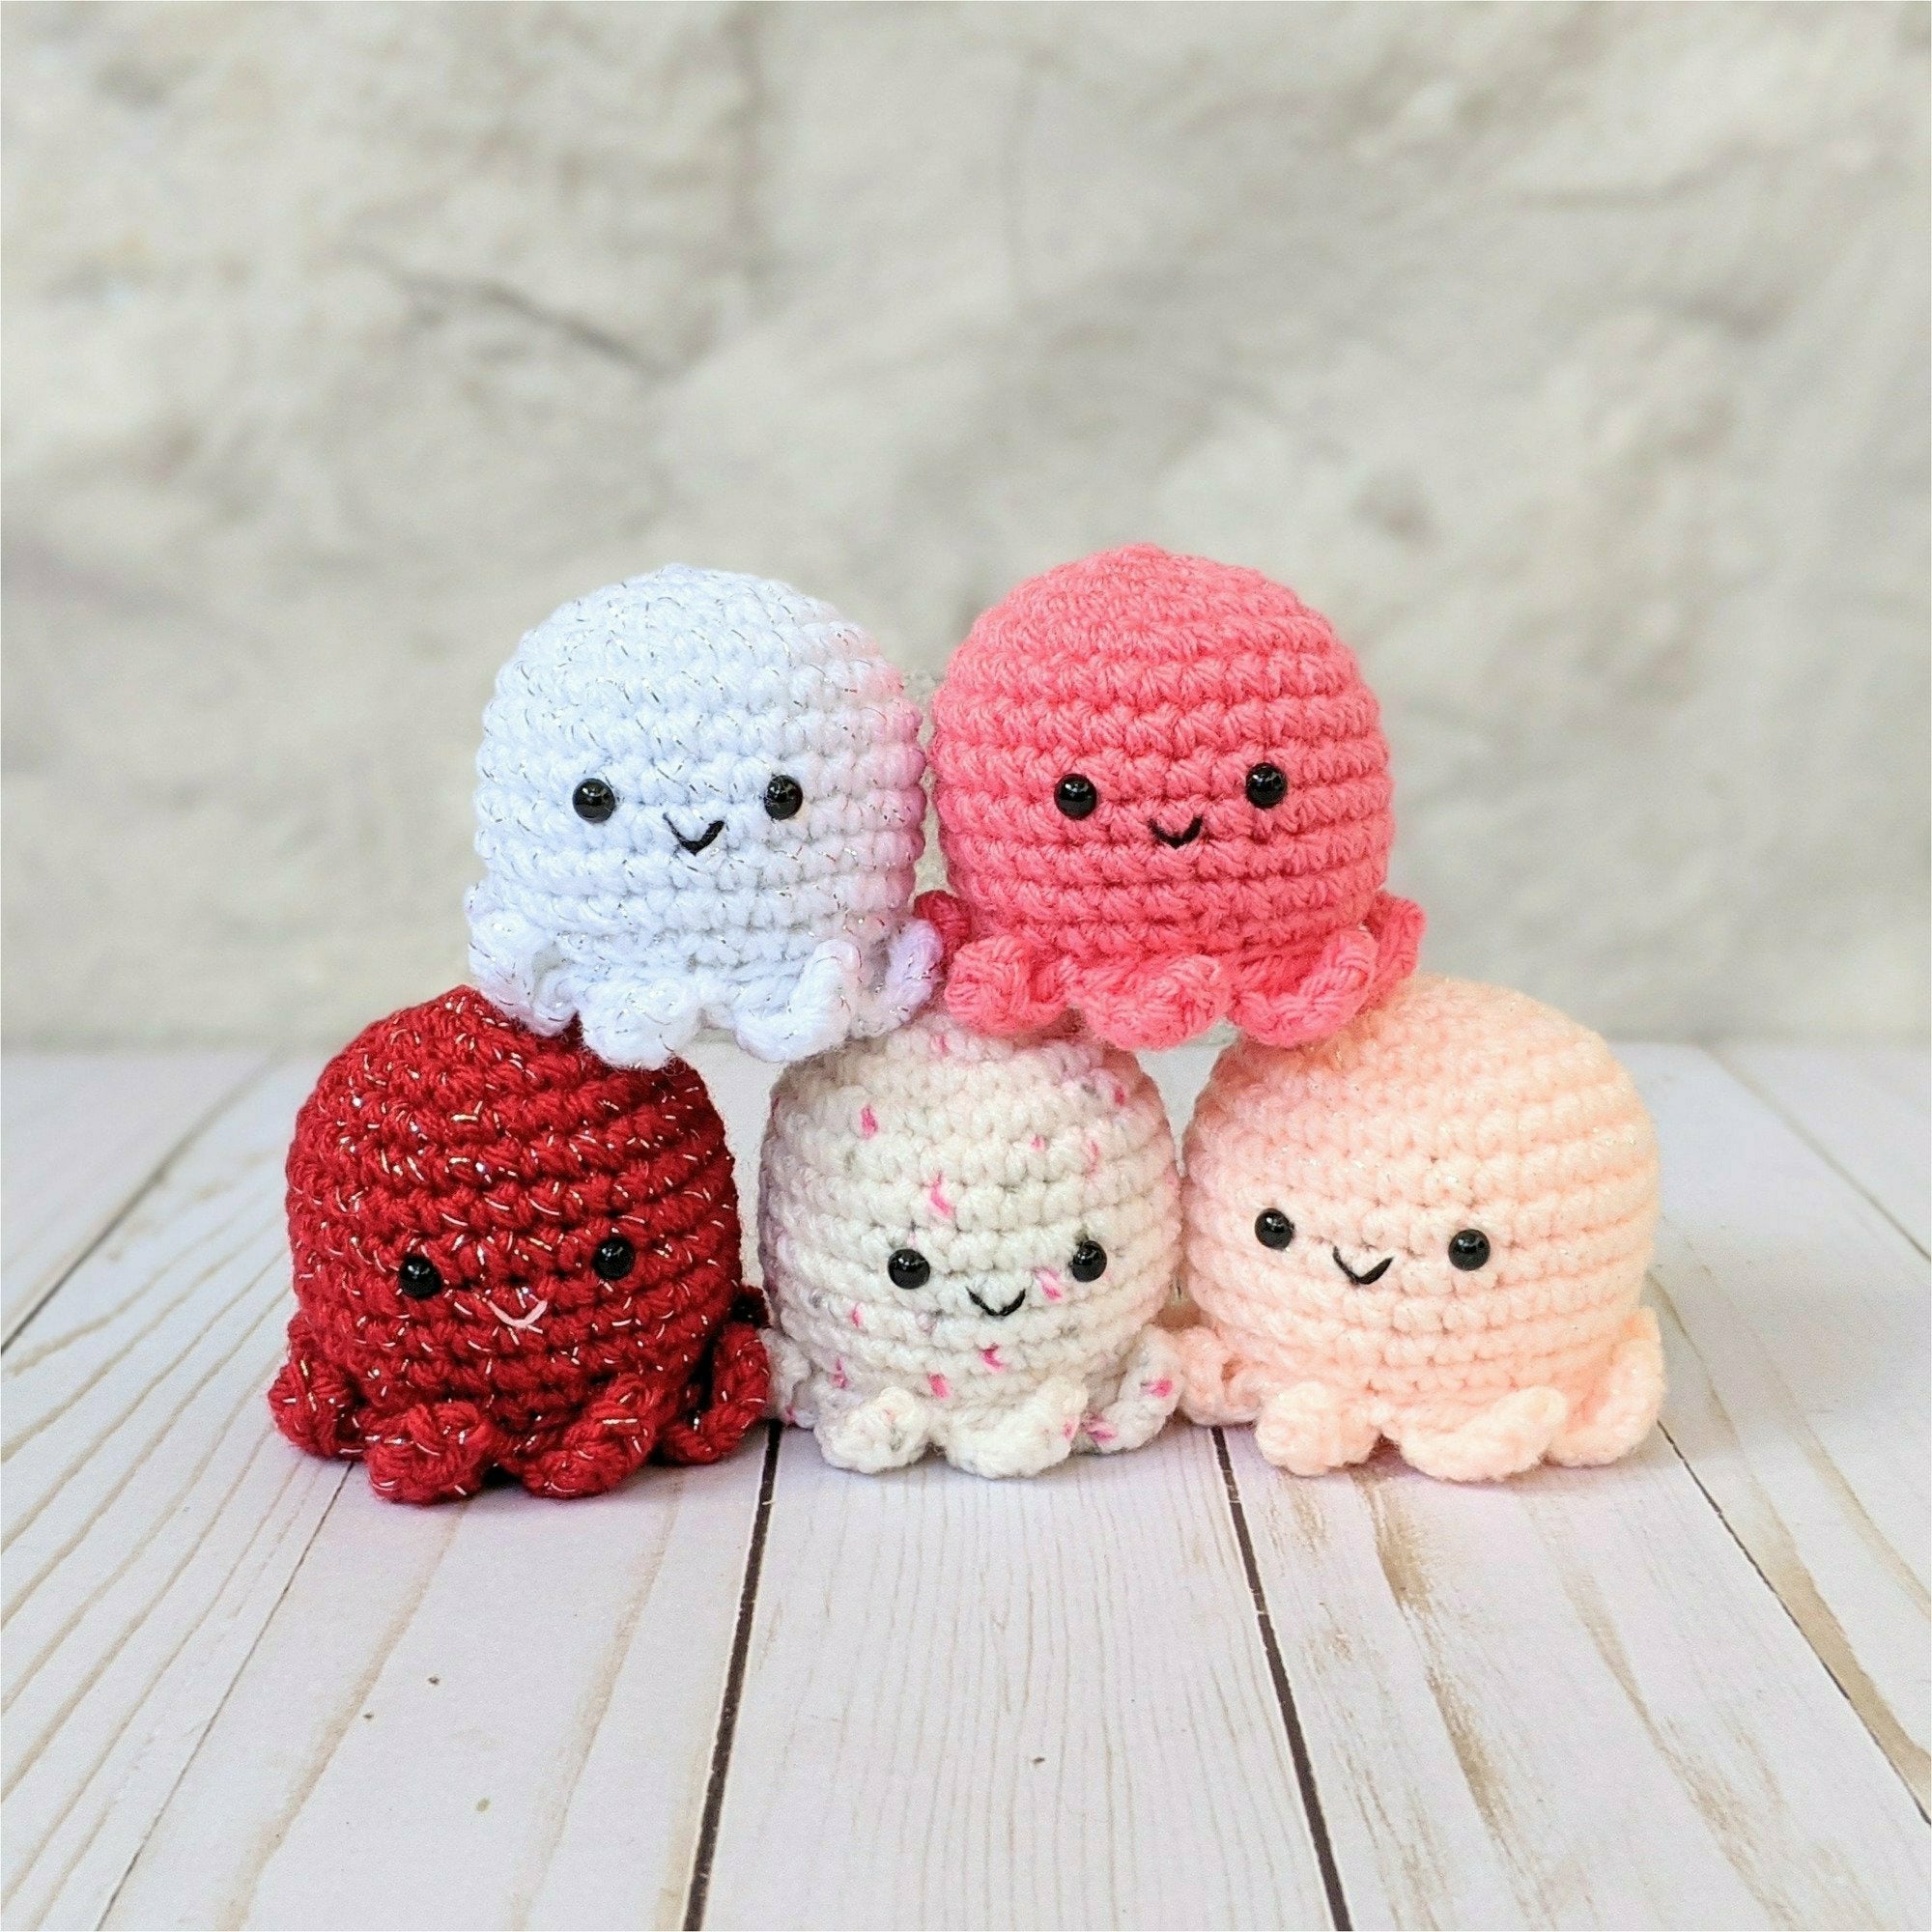 Two easy ways to carry your yarn for amigurumis - Octopus Crochet